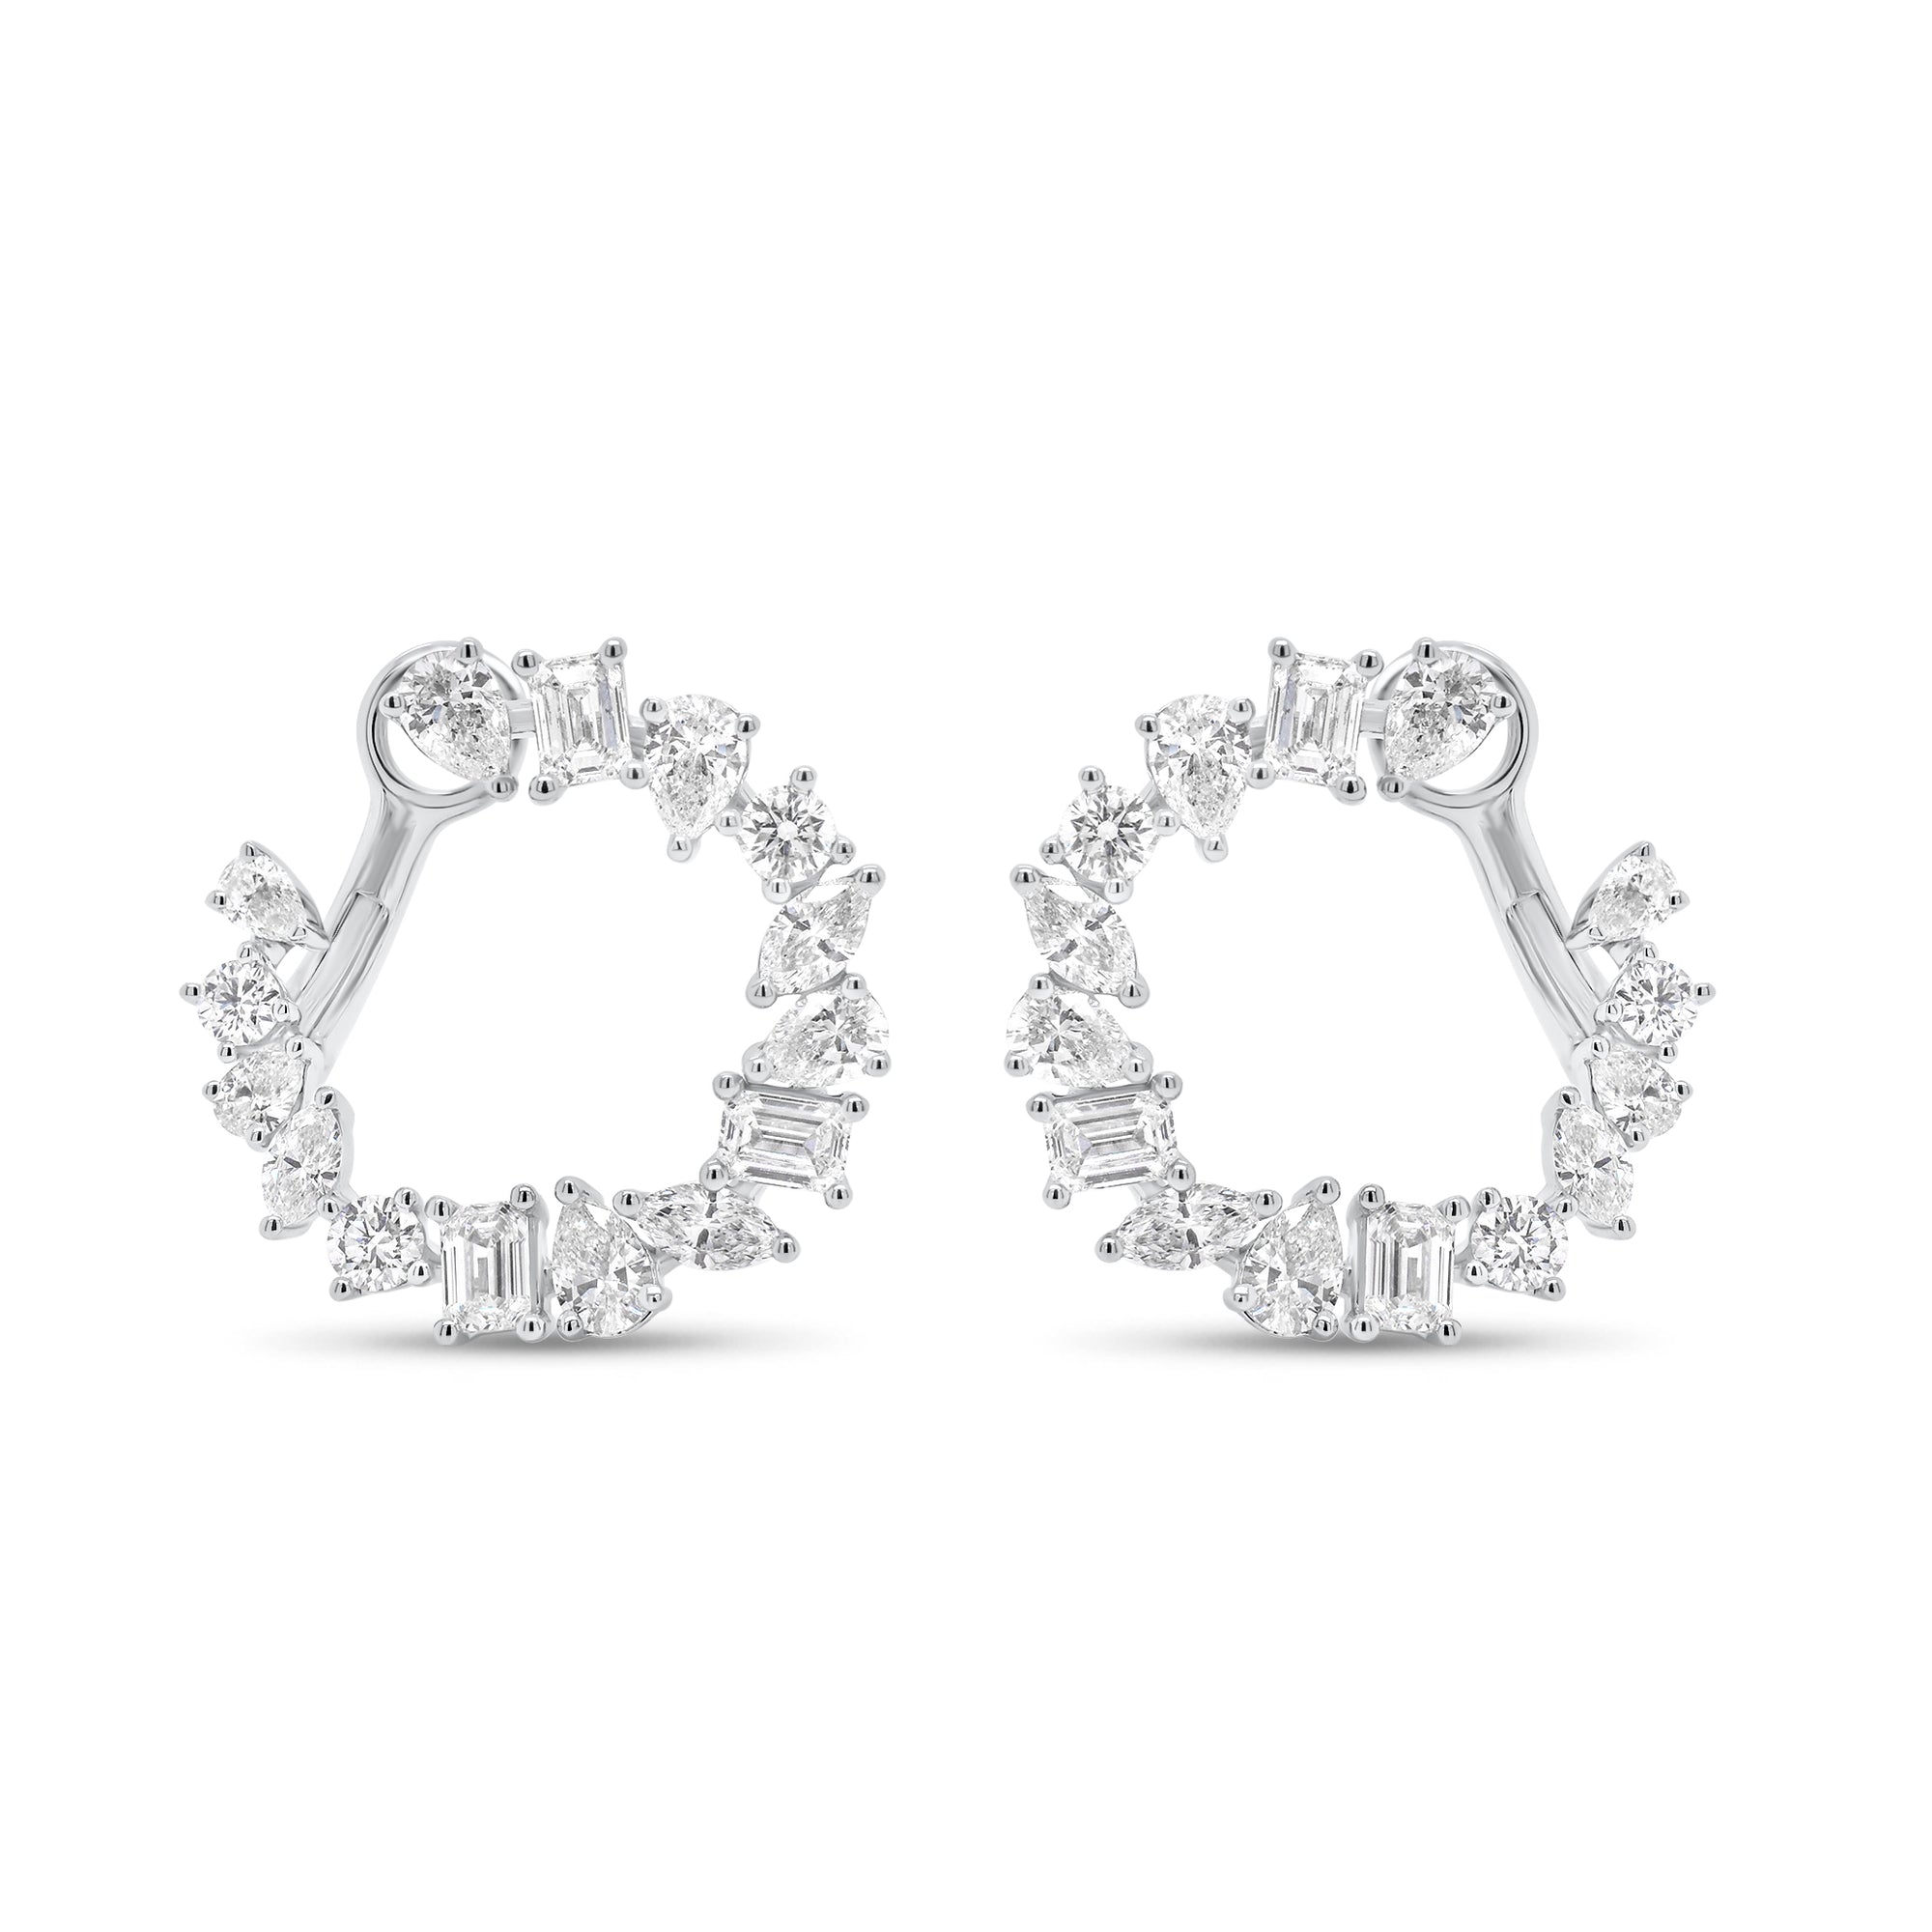 Mixed-Shape Diamond Front-Facing Hoop Earrings - 18K white gold weighing 5.5 grams  - 6 marquise-shaped diamonds weighing 0.44 carats  - 6 emerald-cut diamonds weighing 0.87 carats  - 6 round diamonds weighing 0.35 carats  - 12 pear-shaped diamonds weighing 1.05 carats